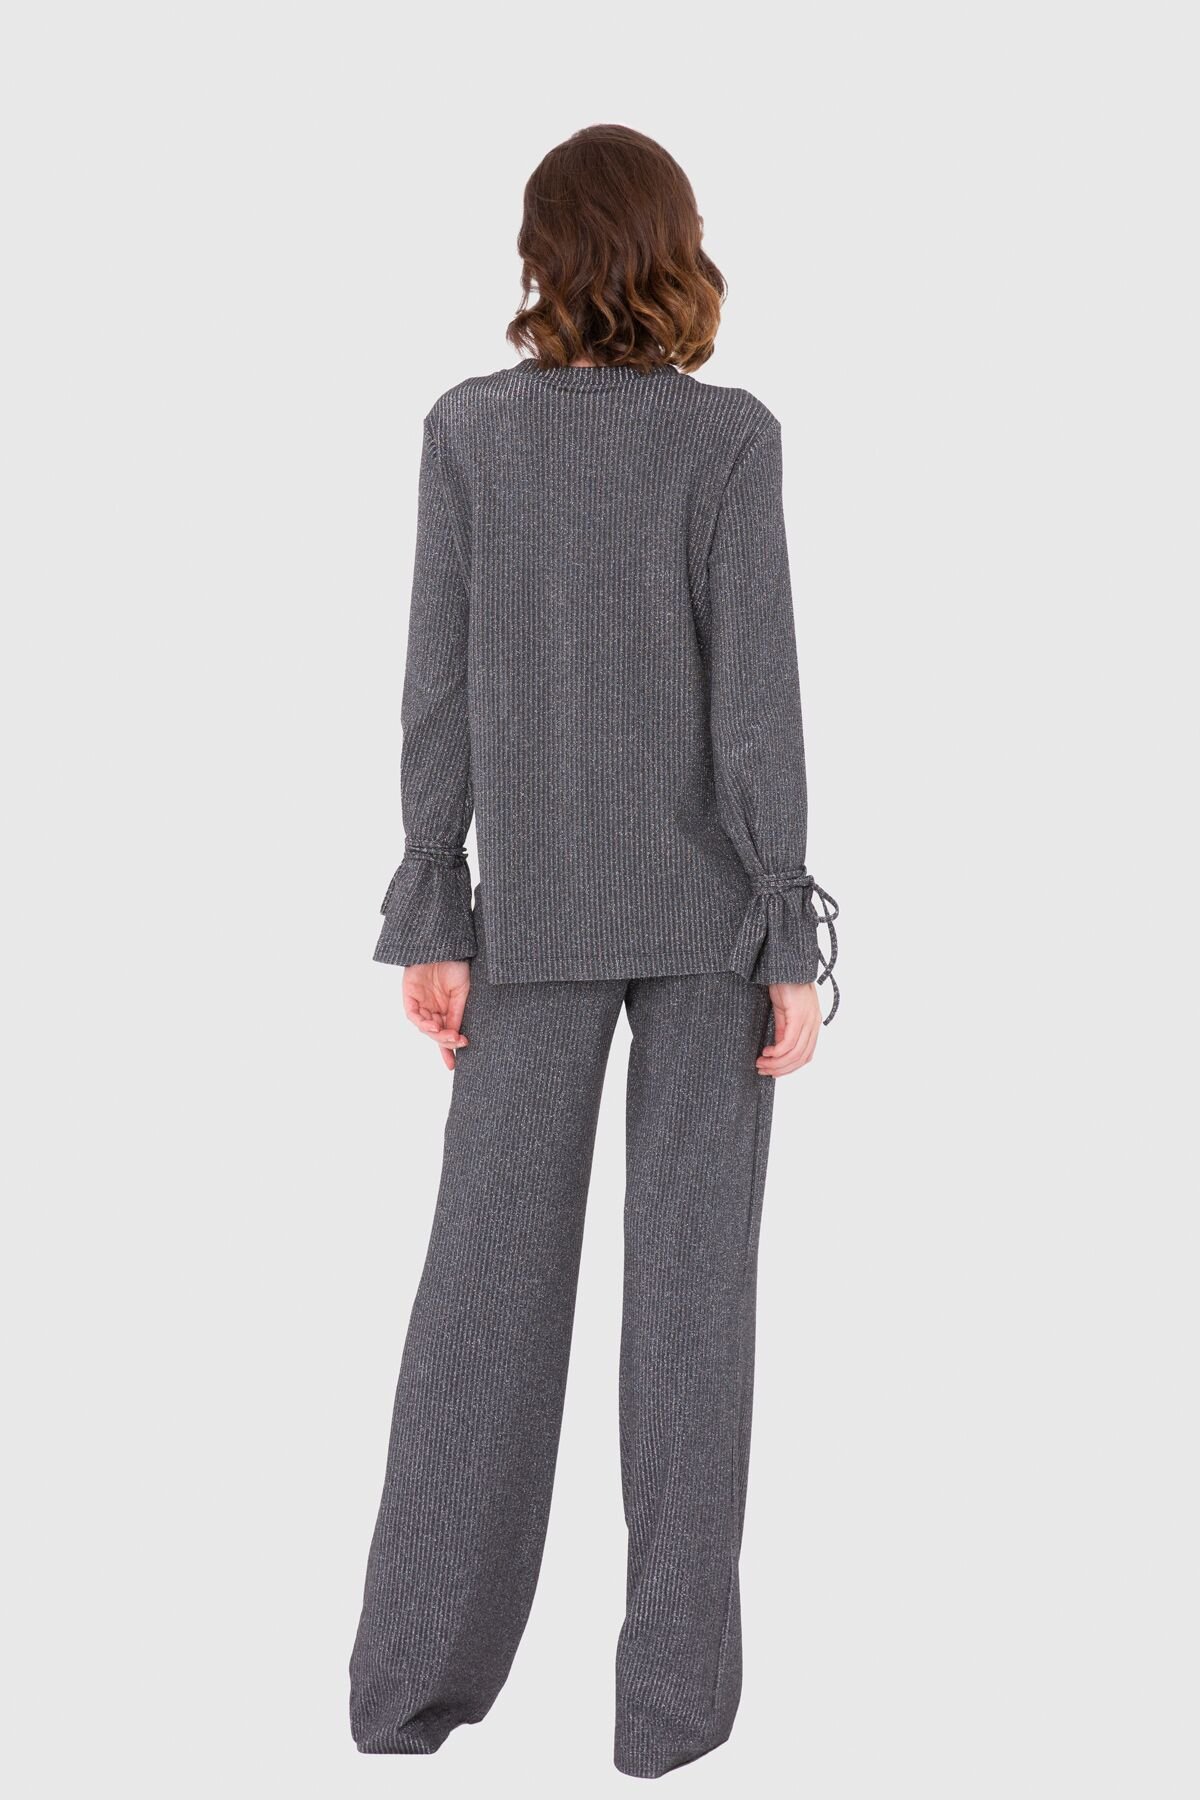 Asymmetrical Cut Waist Blouse and Trousers Gray Suit